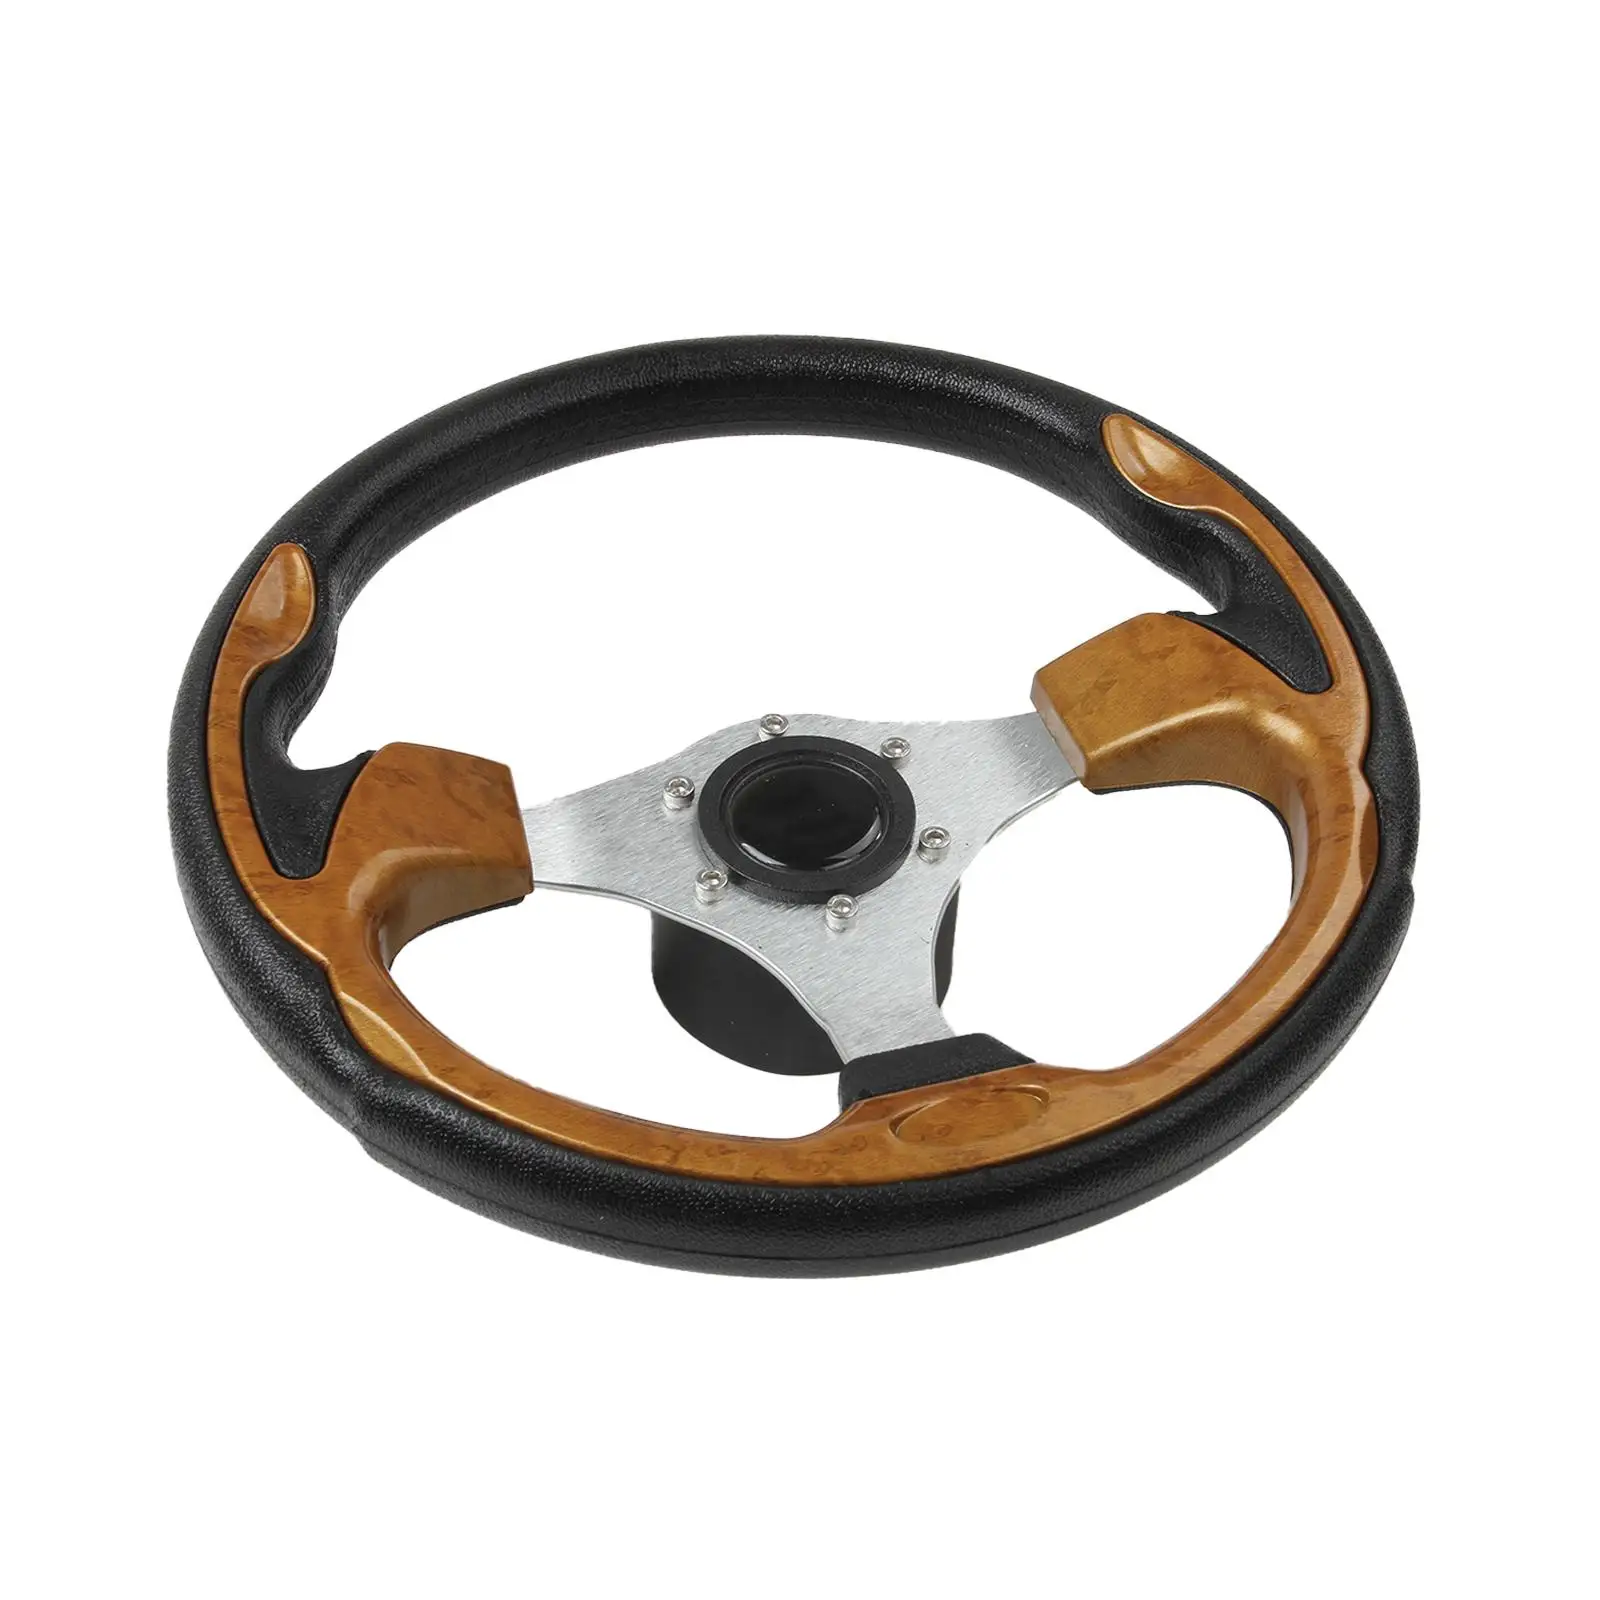 Marine Boat Steering Wheel Comfortable to Grip Accessory 3 Spokes for Pontoon Boats Yachts Marine Boats Vessels Attachments